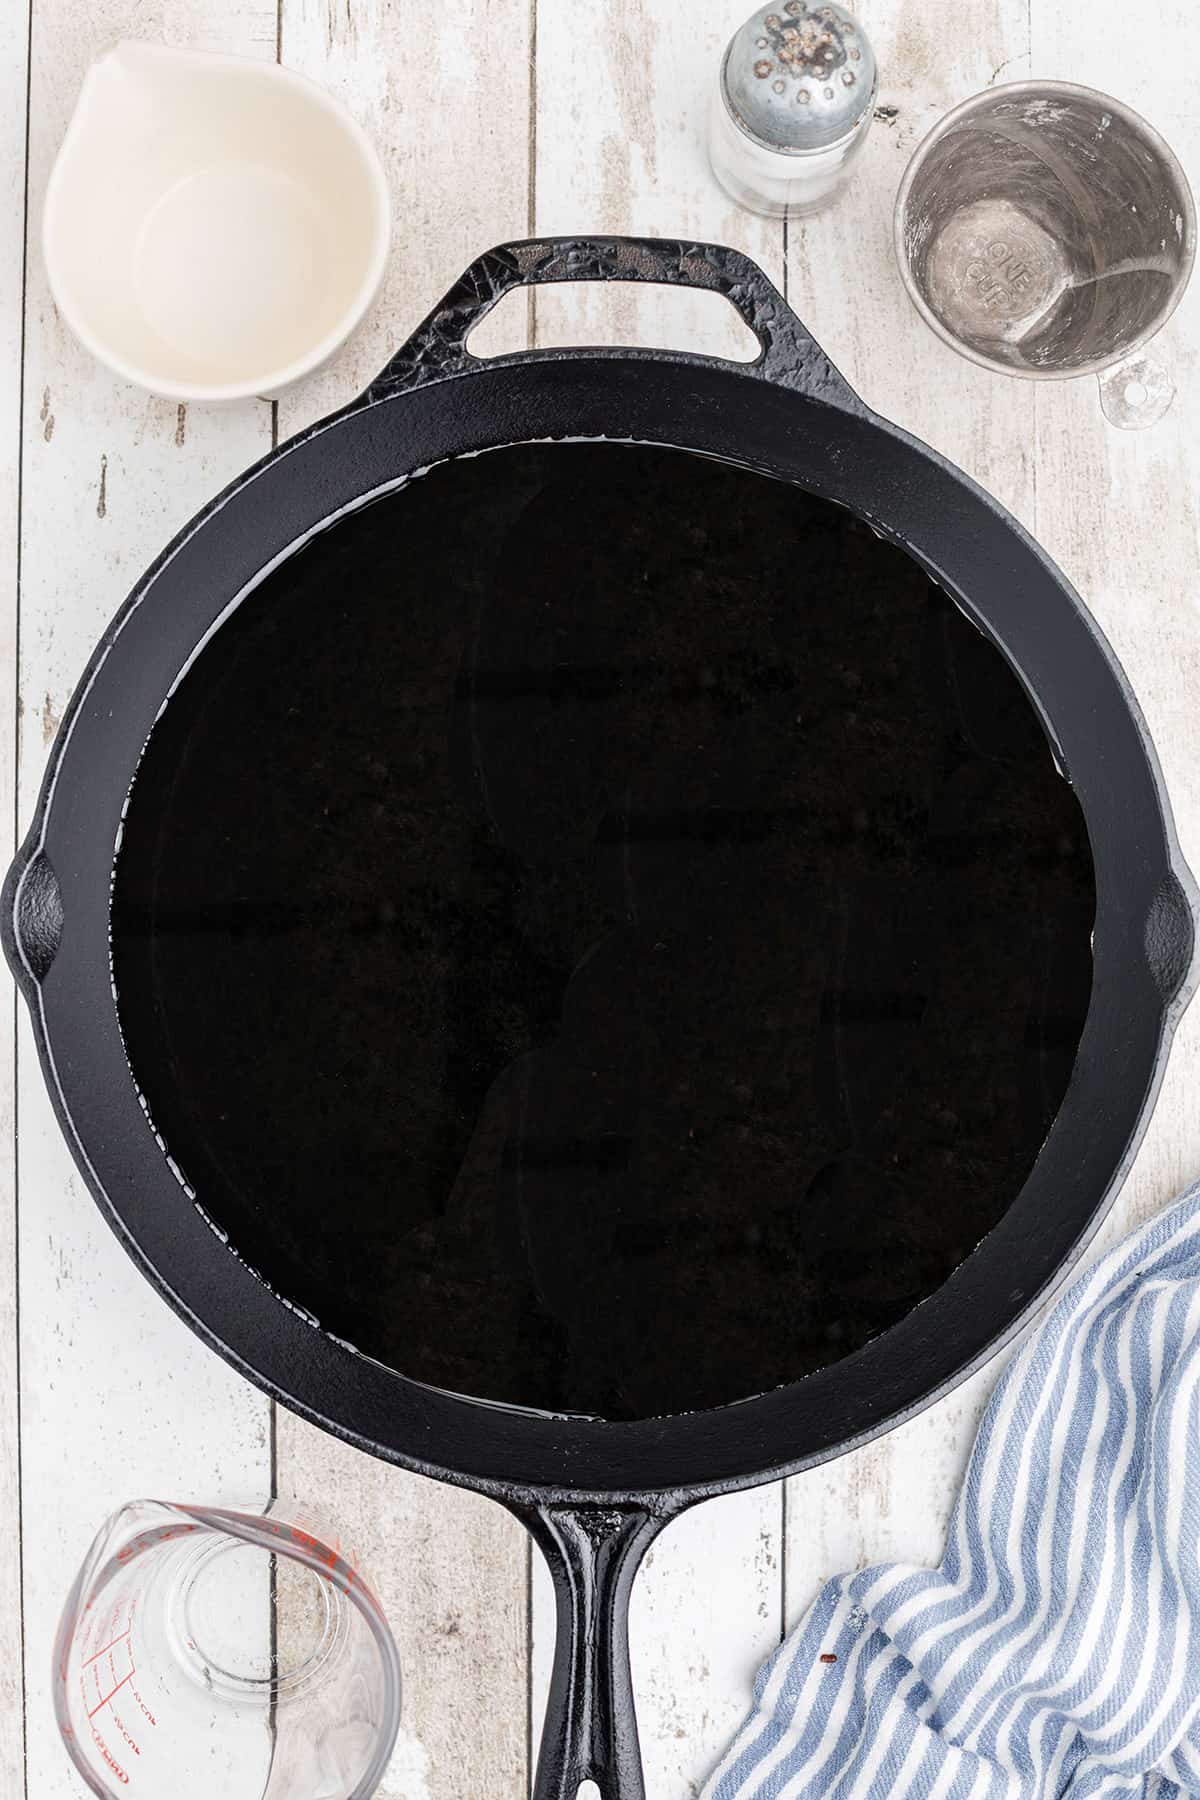 Cast iron skillet with oil in the bottom.